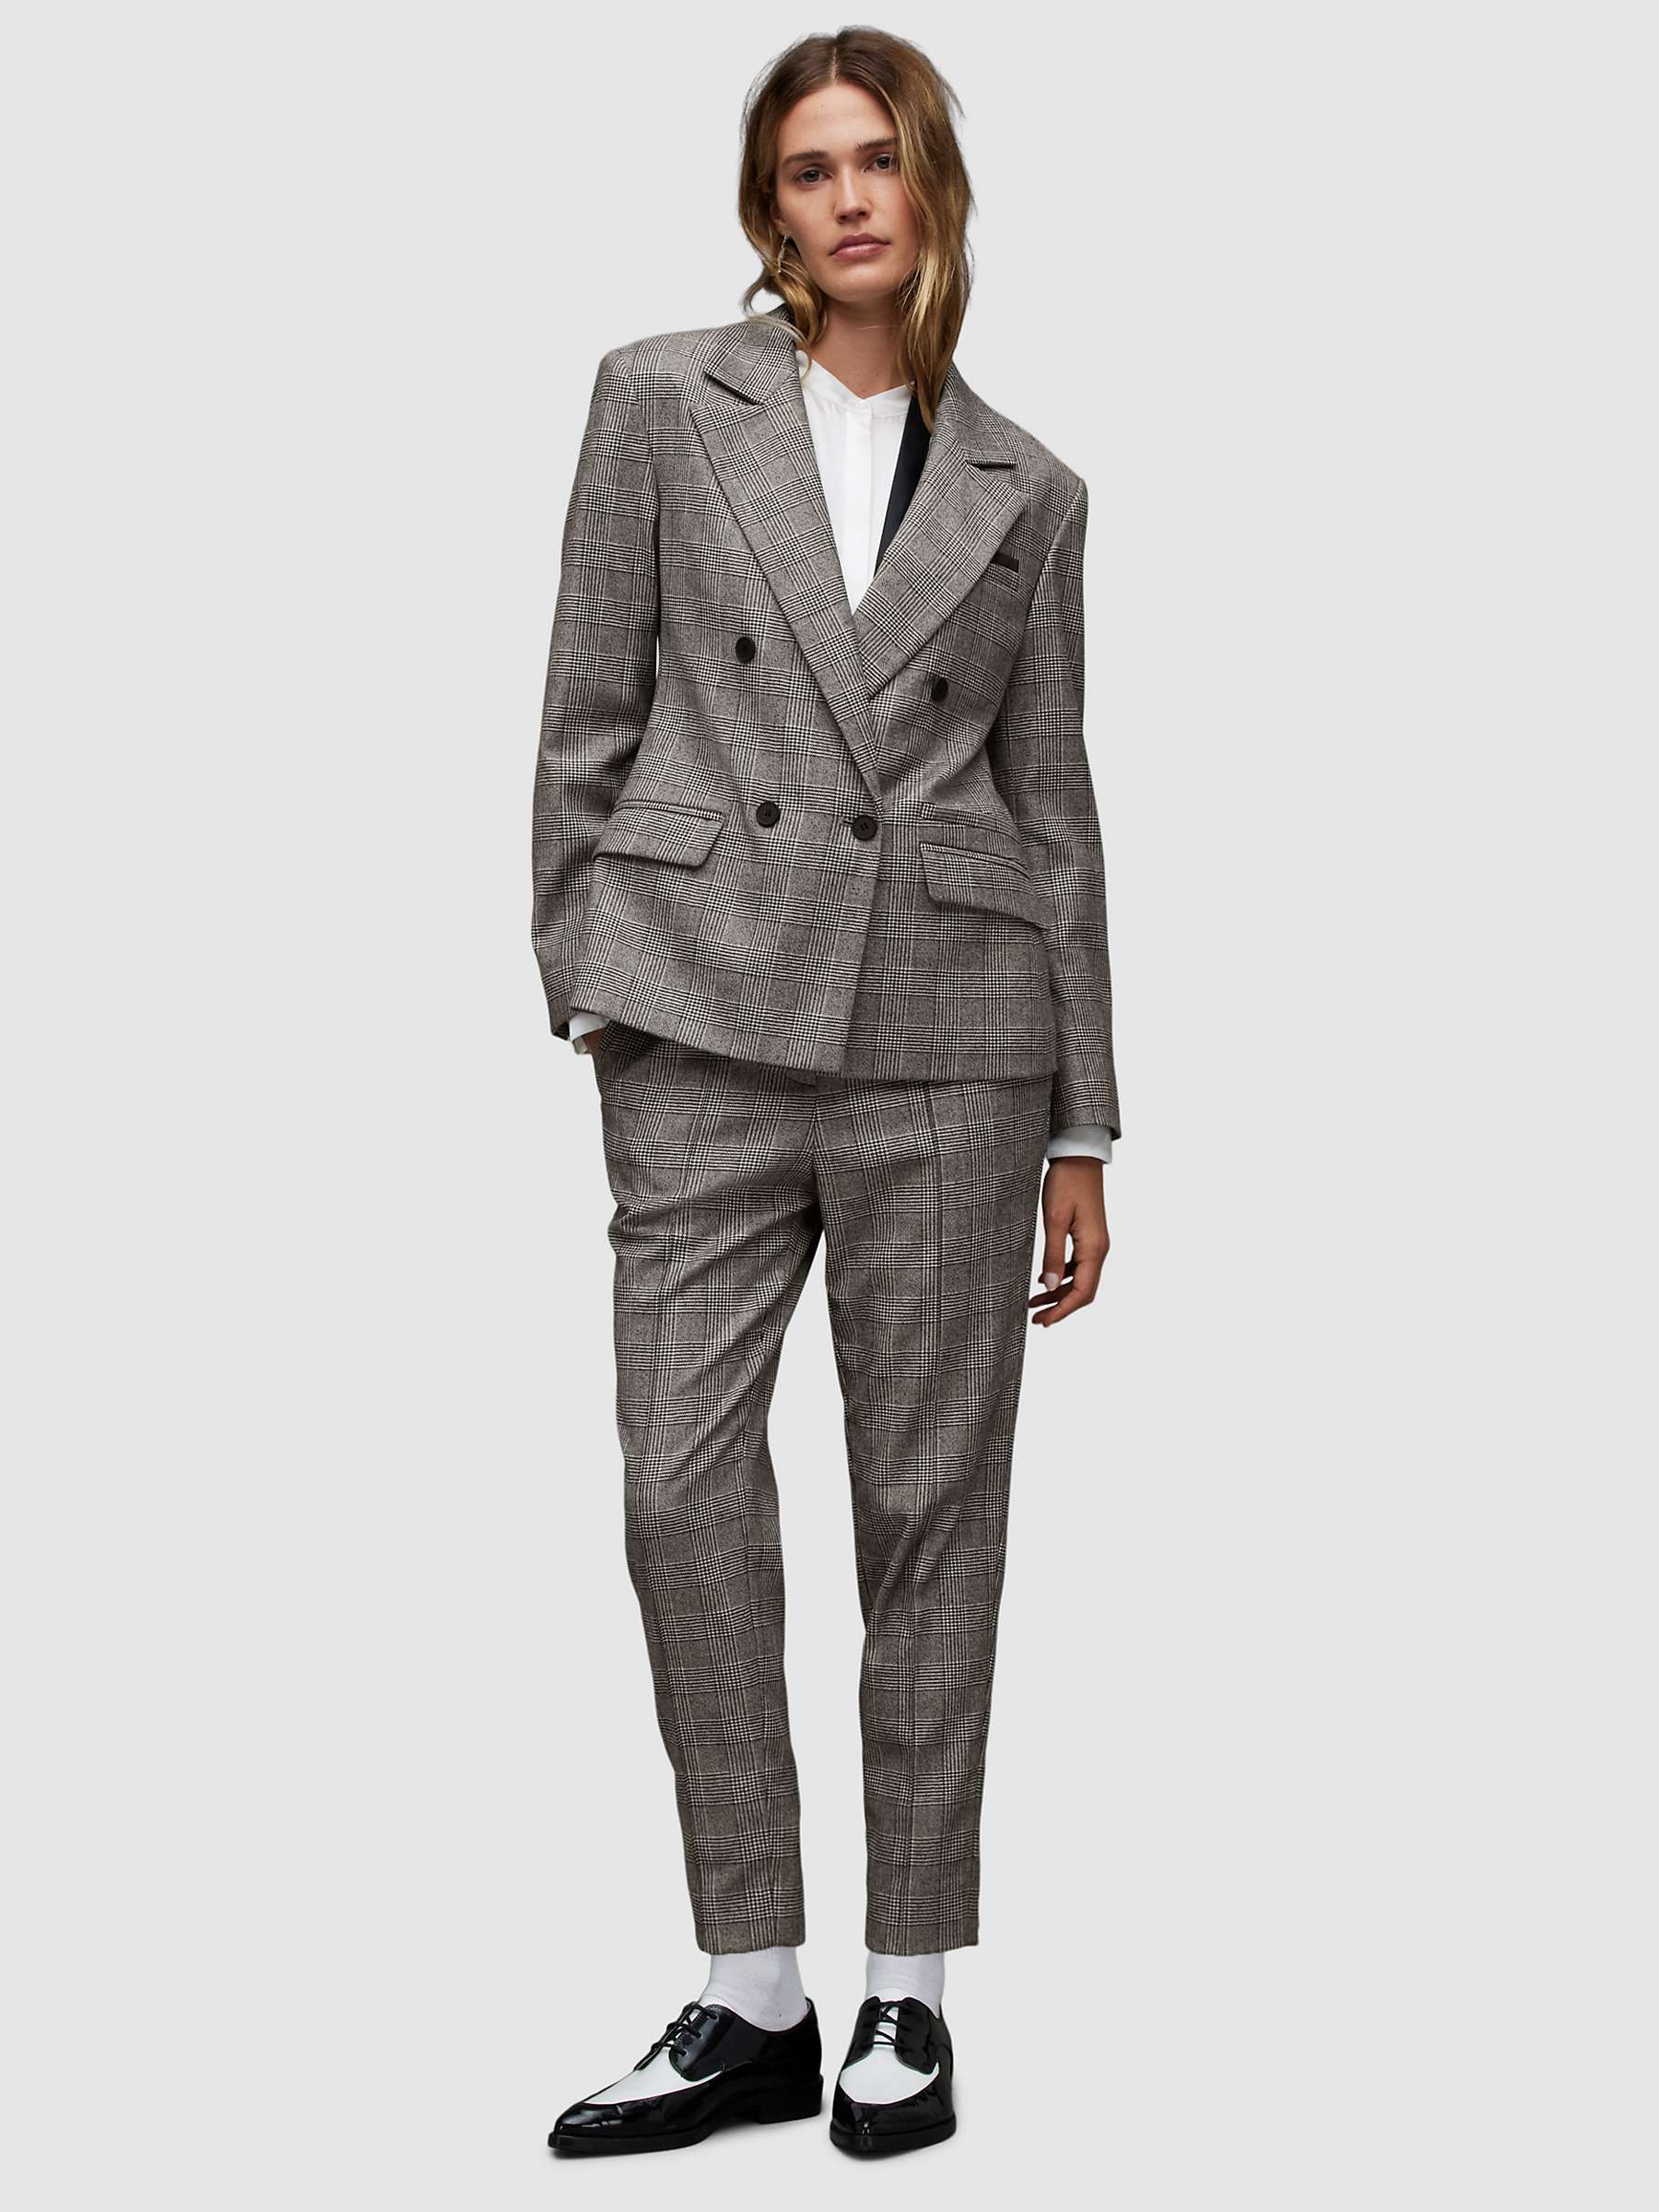 Buy AllSaints Bea Skinny Fit Wool Blend Check Trousers, Grey Online at johnlewis.com